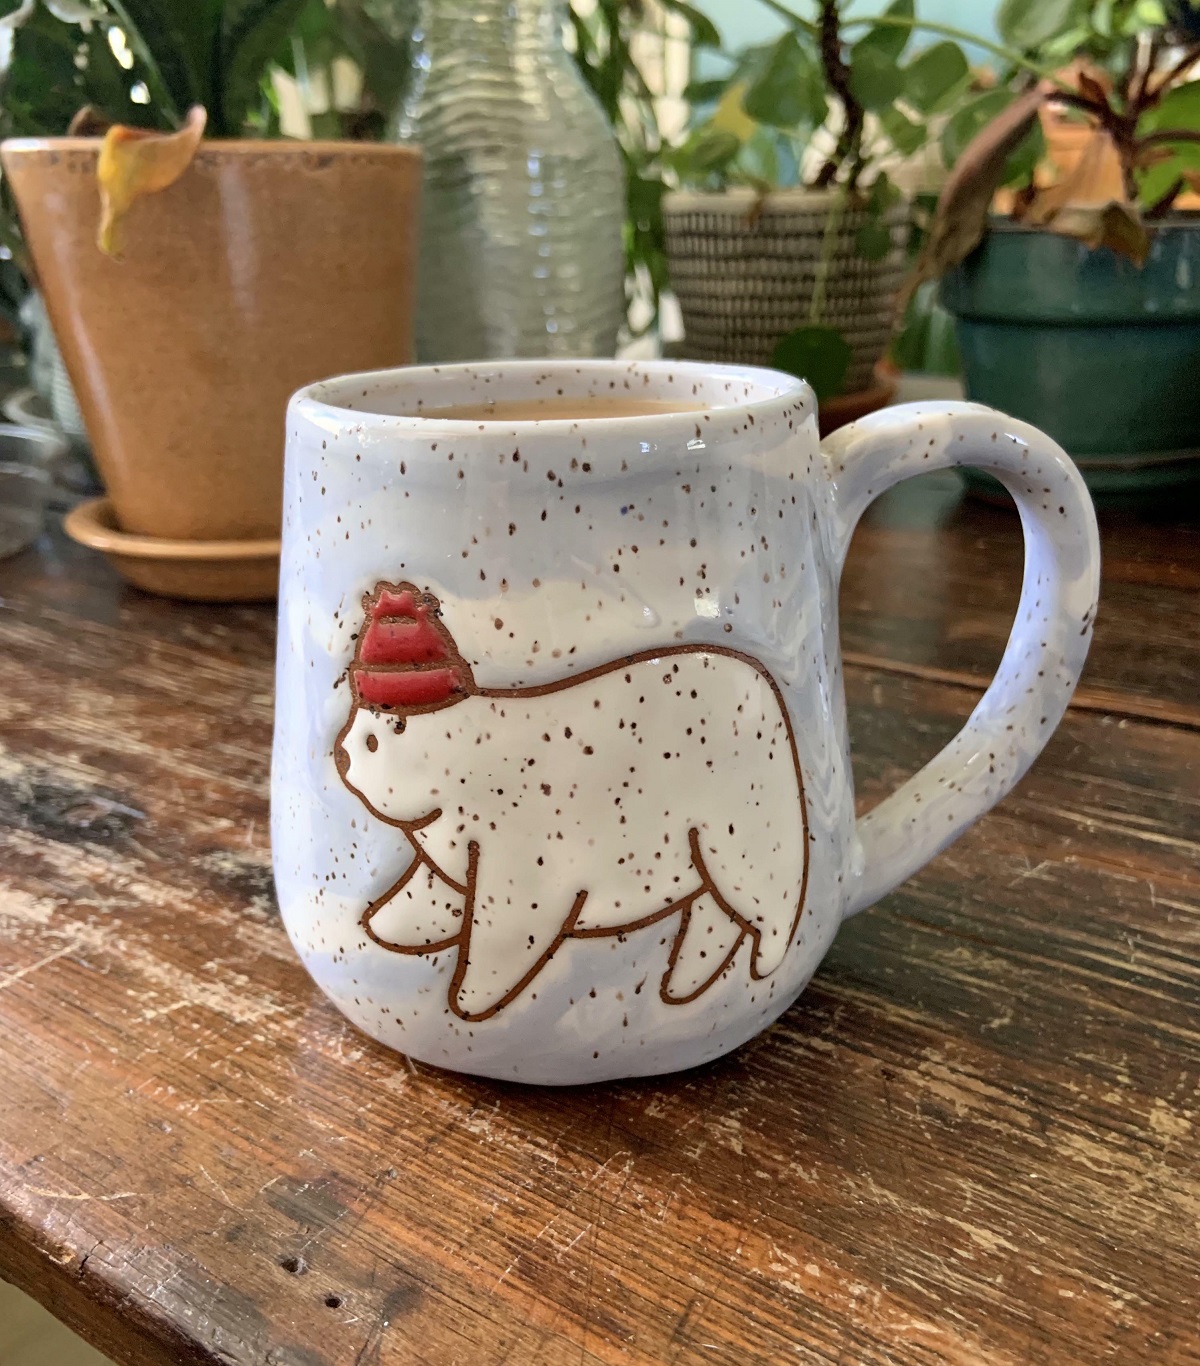 I Don't Usually Keep My Mugs, But I Loved This Awesome Cozy Bear